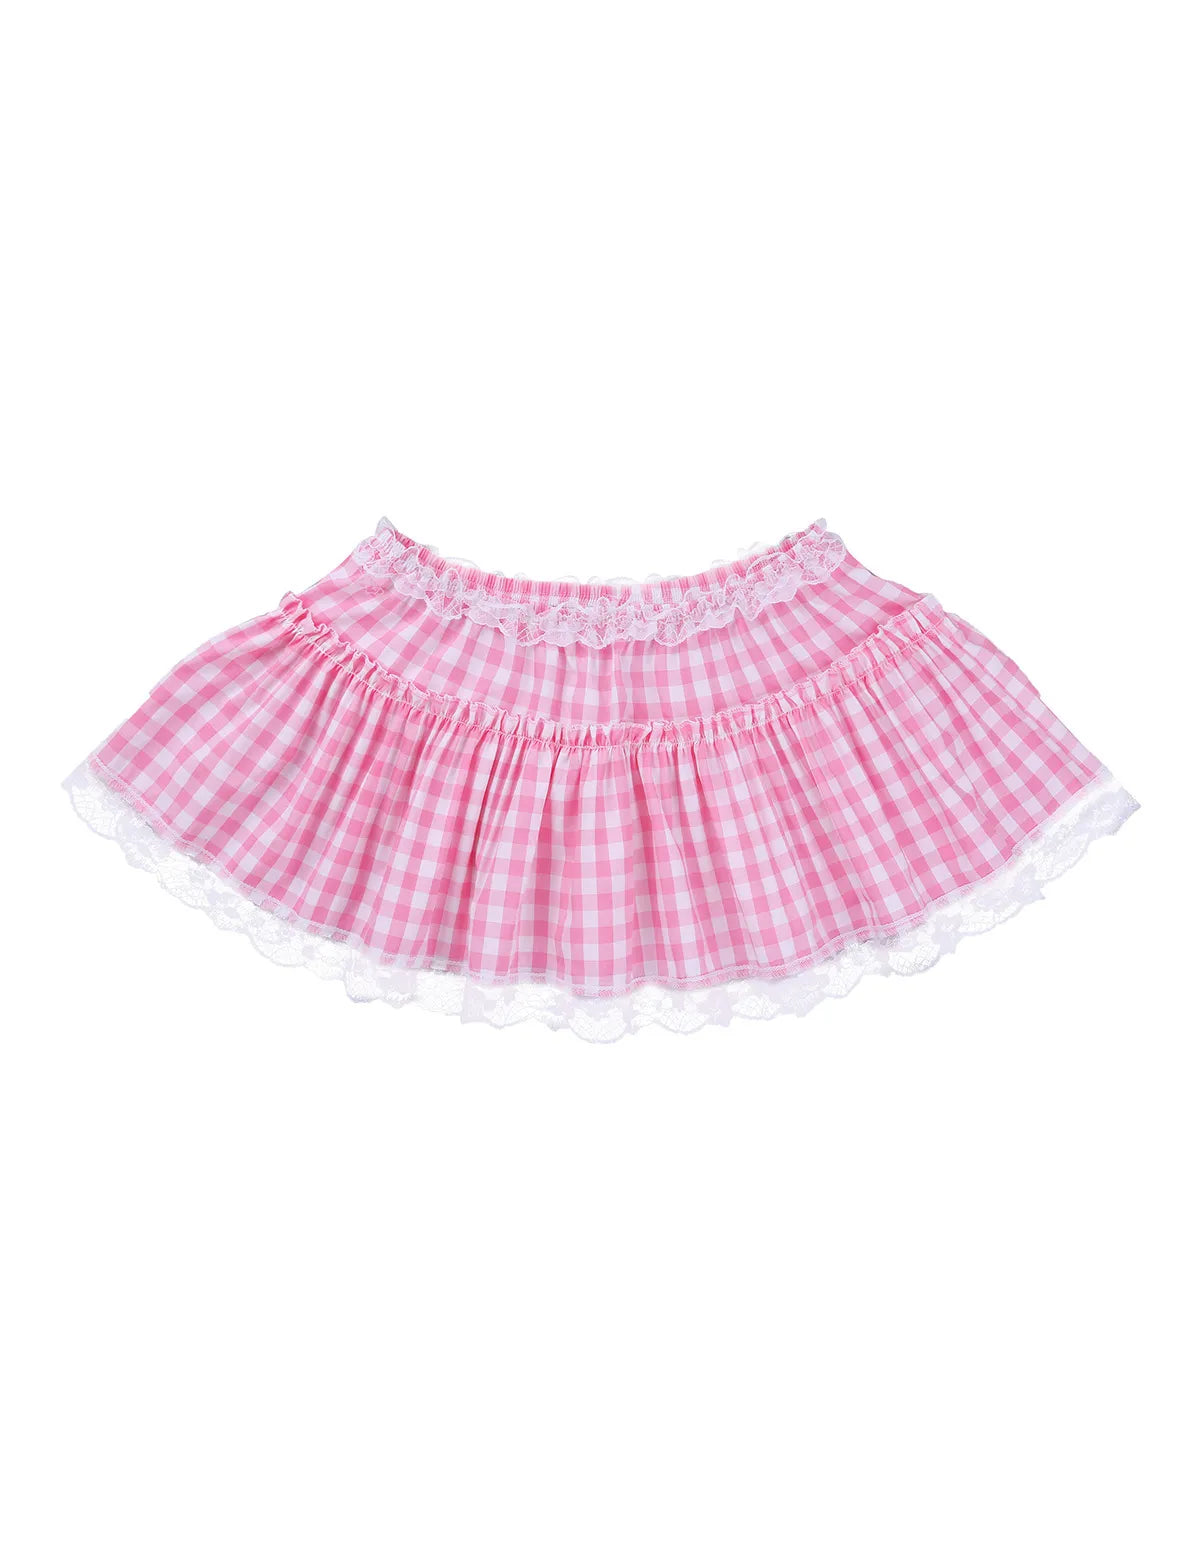 Lace + Gingham Micro Skirt